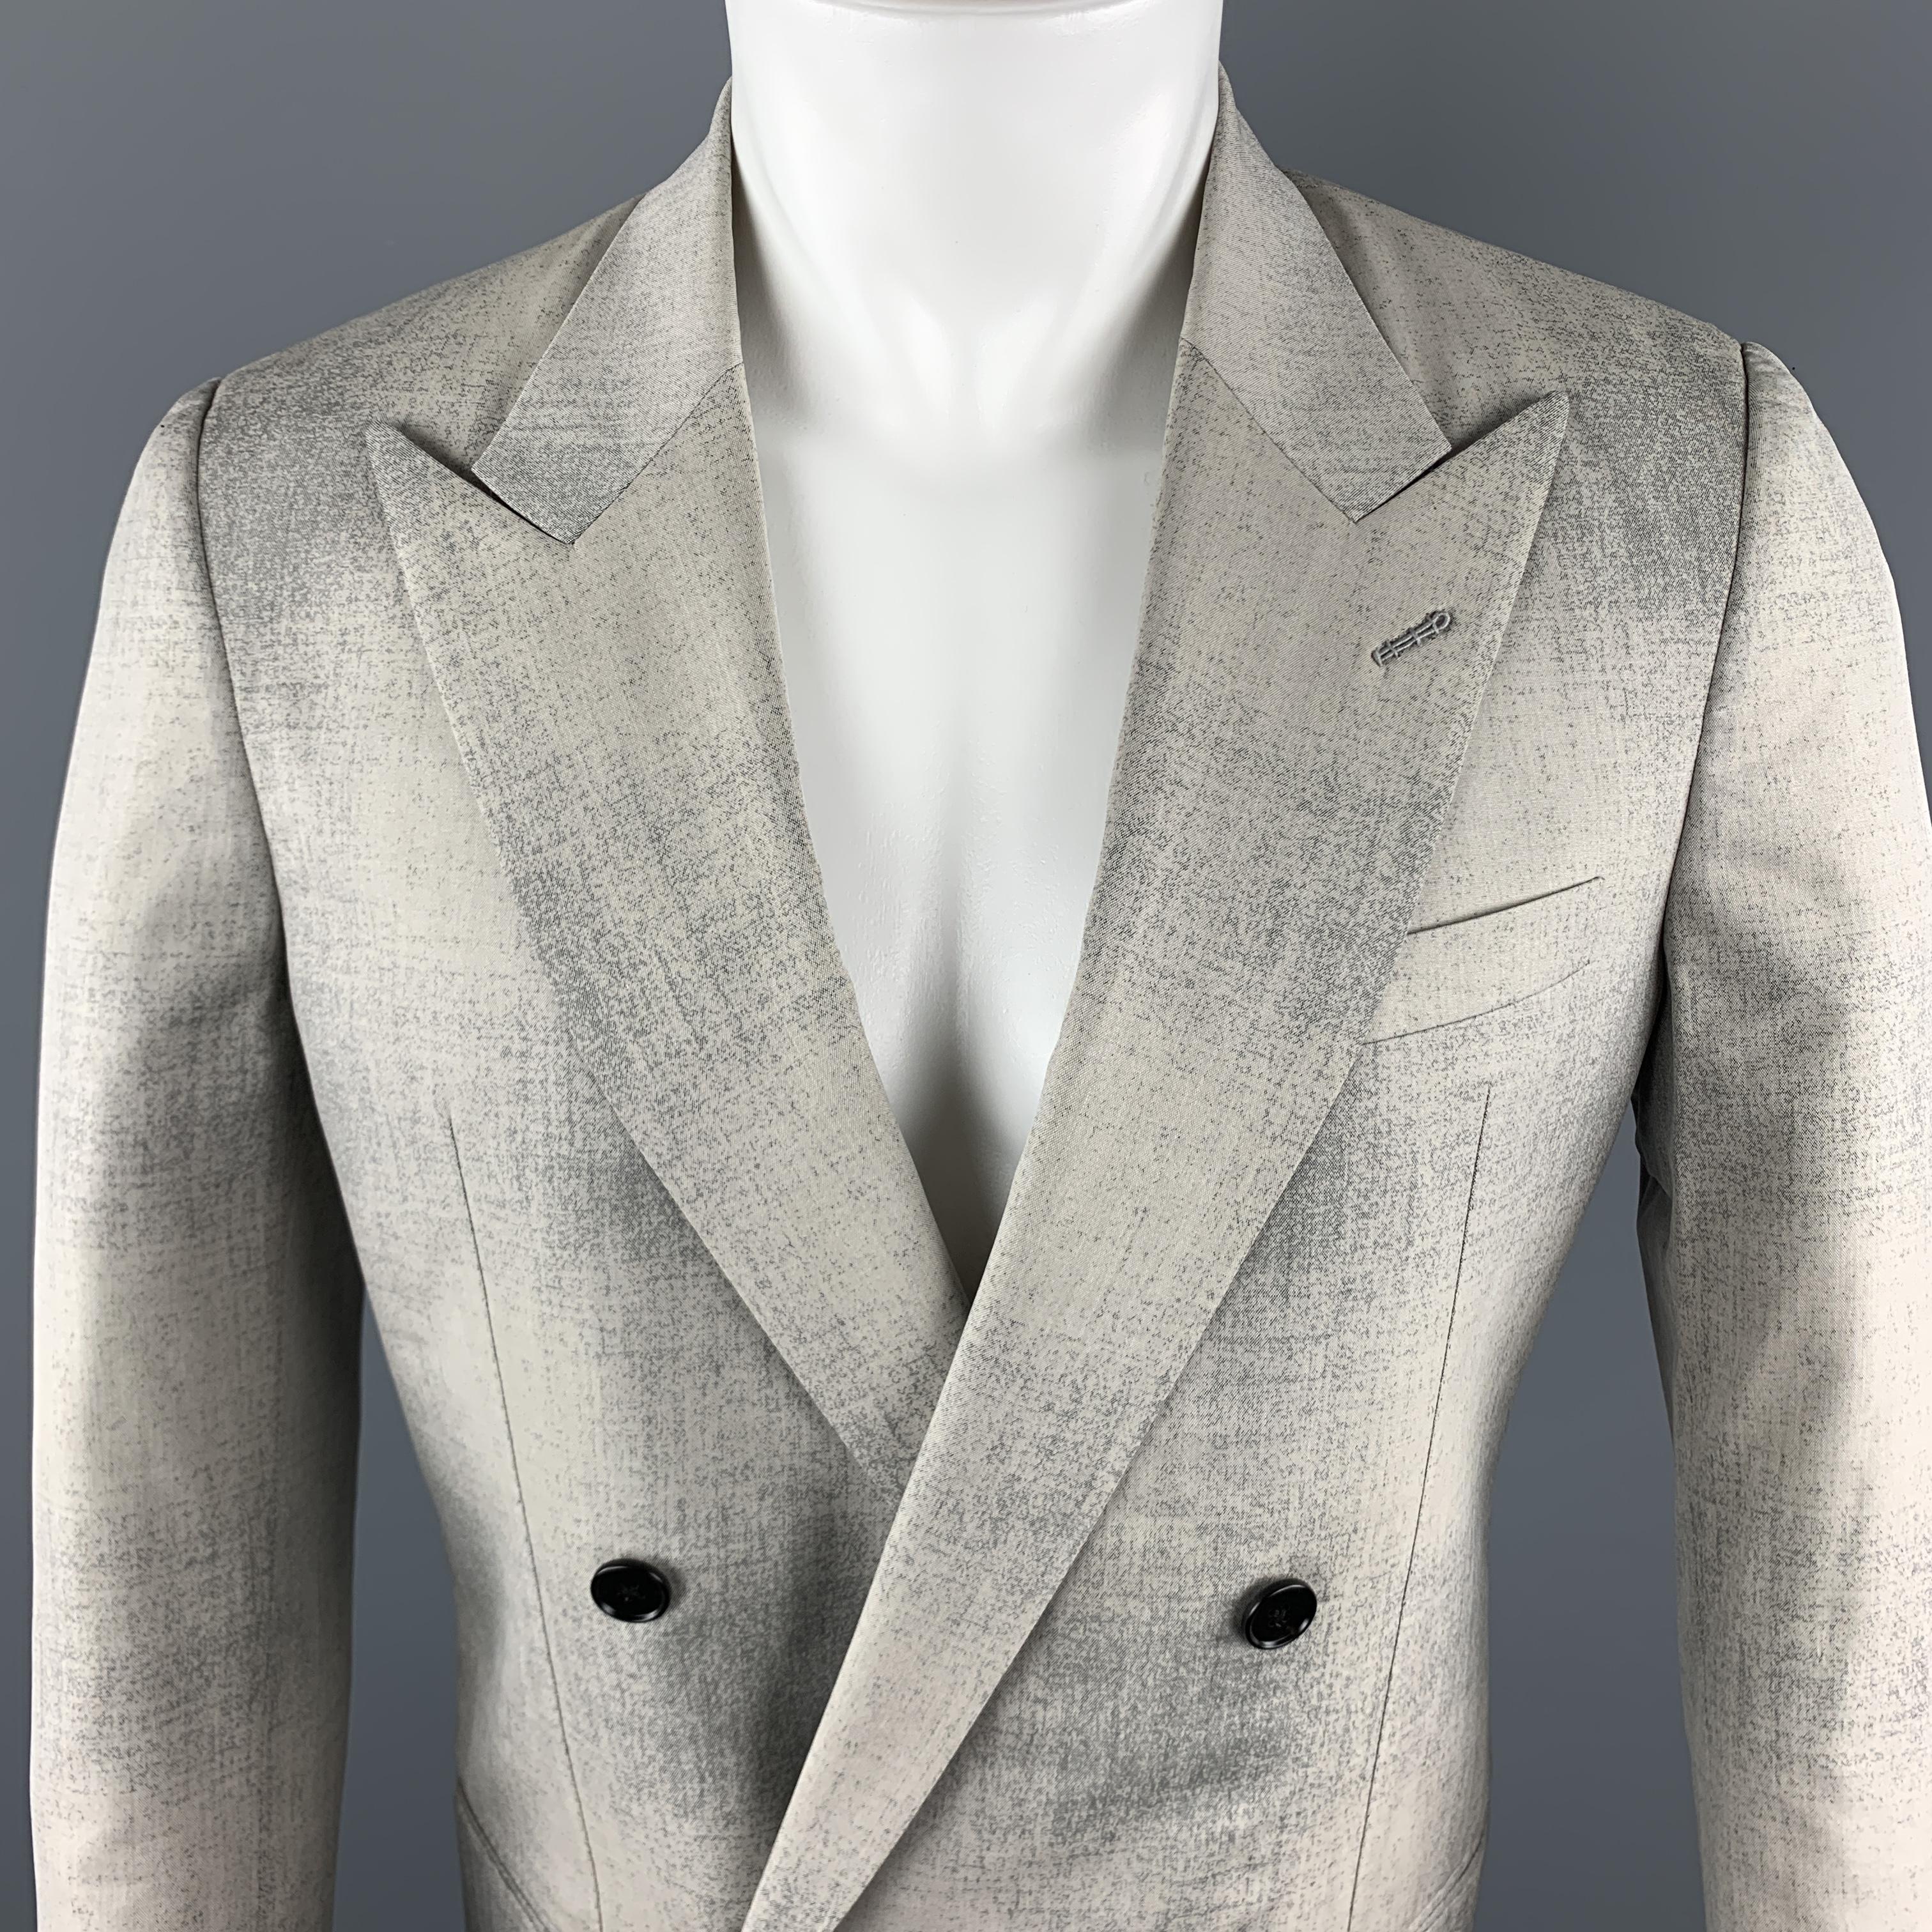 MAISON MARGIELA SARTORIAL Sport Coat comes in a gray marbled wool material, with a peak lapel, double breasted, slit pockets, cufflinks, and a single vent at back. Made in Italy.

Excellent Pre-Owned Condition.
Marked: IT